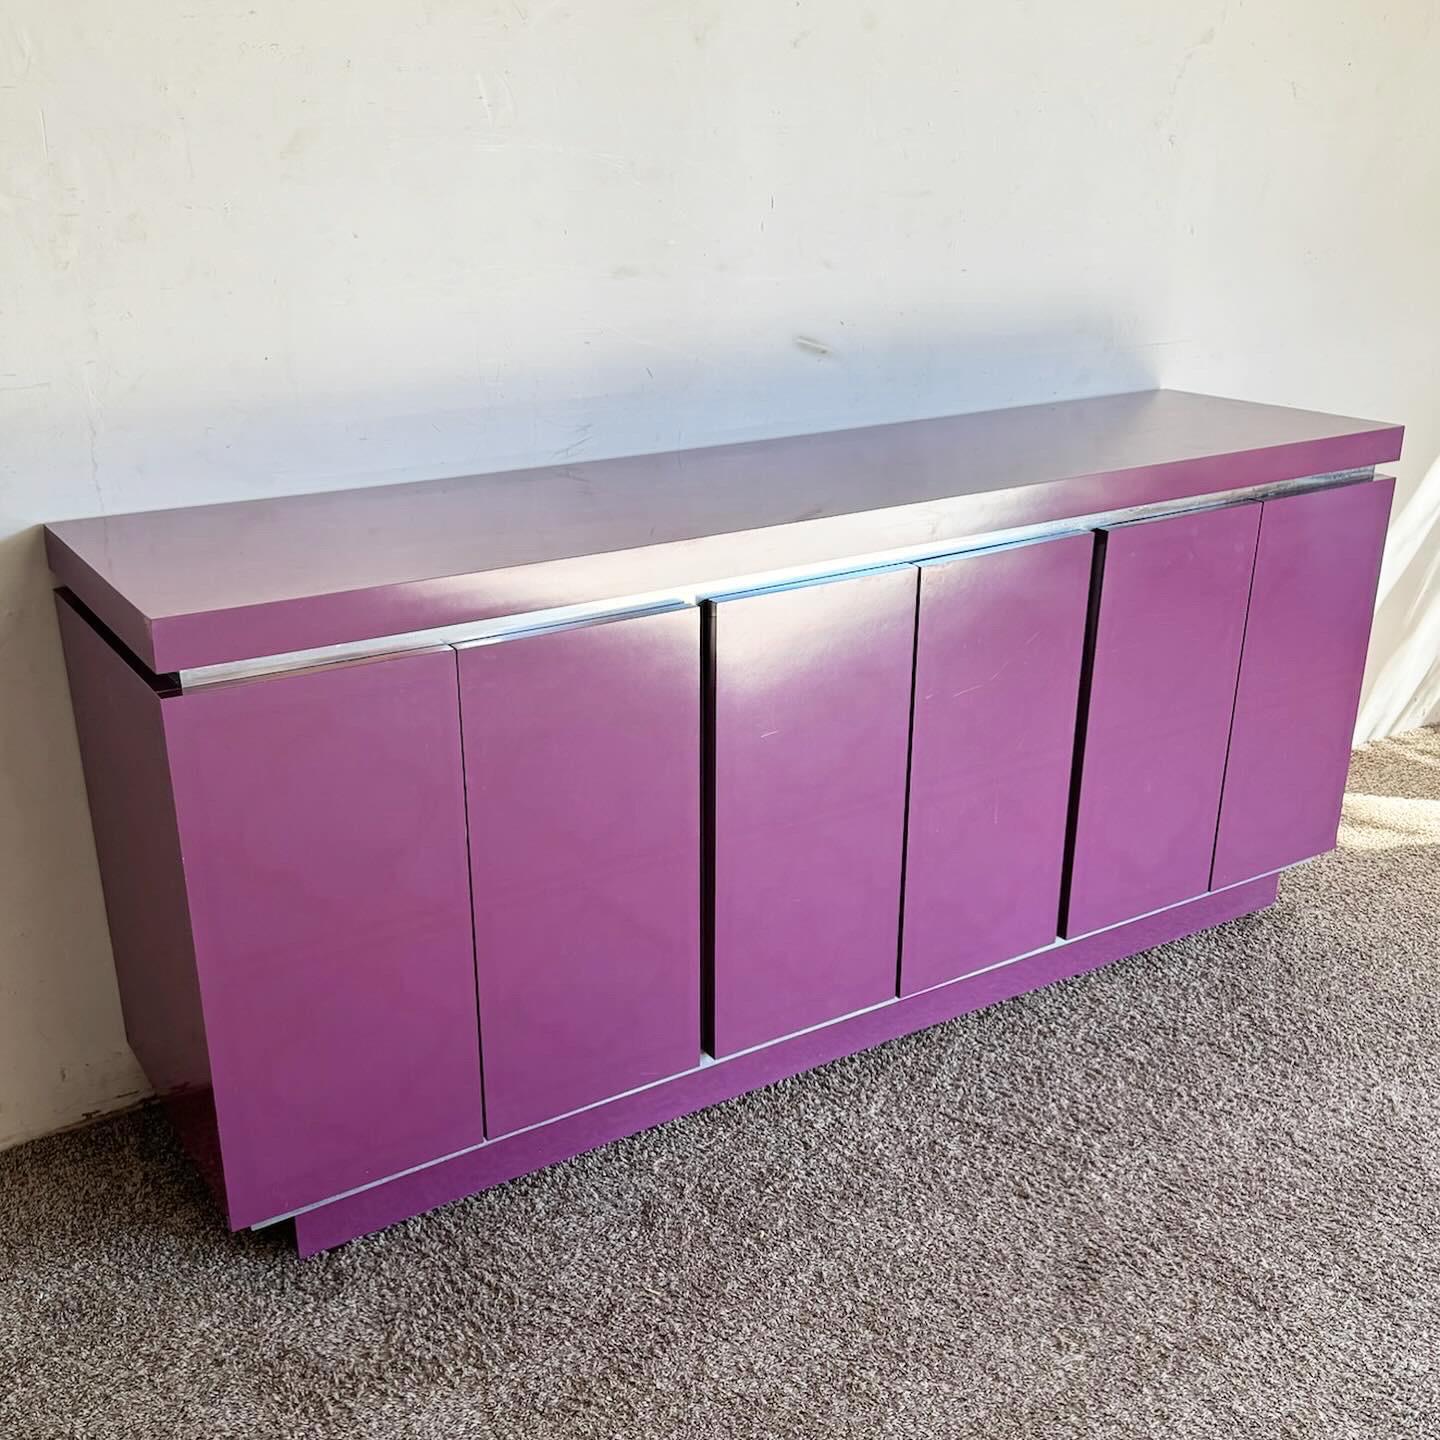 Make a bold statement in your contemporary living space or office with the Postmodern Purple Lacquer Laminate and Brushed Metal Credenza. This eye-catching piece features a vibrant purple lacquer laminate, beautifully complemented by sleek brushed